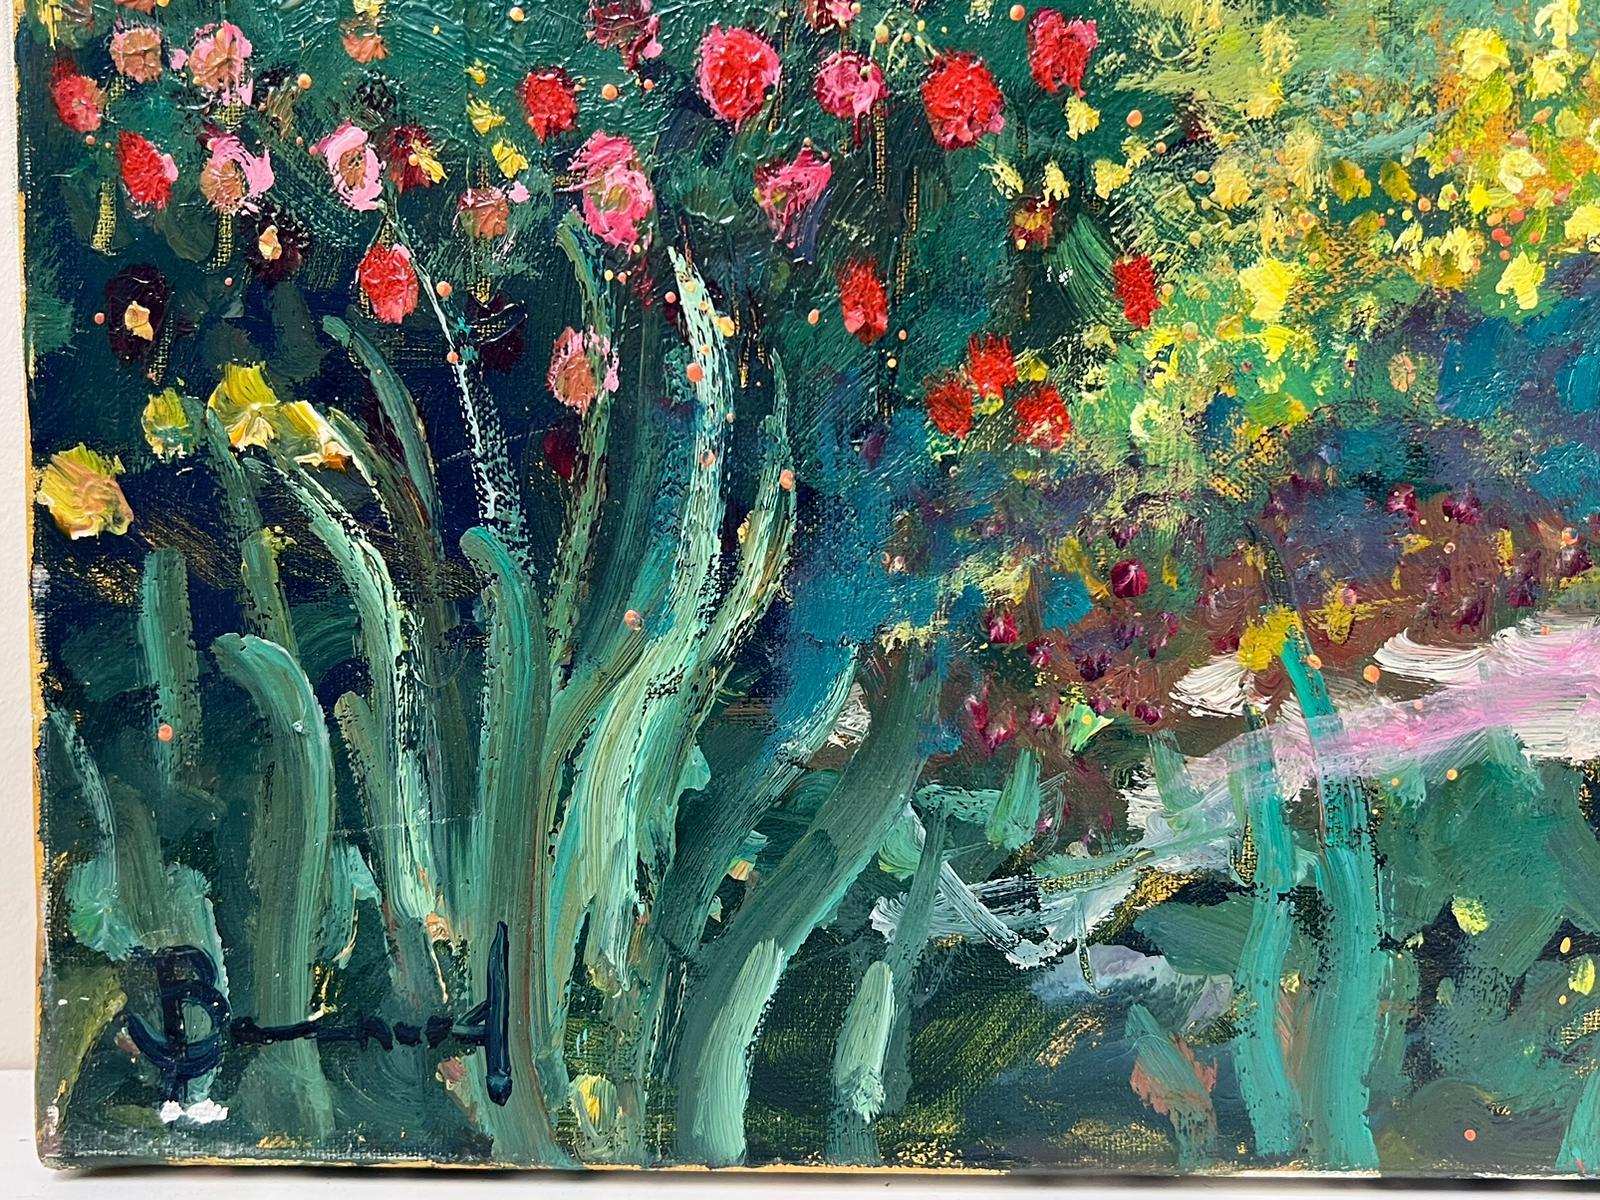 Artist/ School: Guy Benard (French b.1928) signed lower corner. Painter from Rouen, Normandy, exhibited throughout France. 

Title: Jardin en Juin

Medium:  signed oil on canvas, unframed and inscribed verso

size: 18 x 22 inches

Provenance: